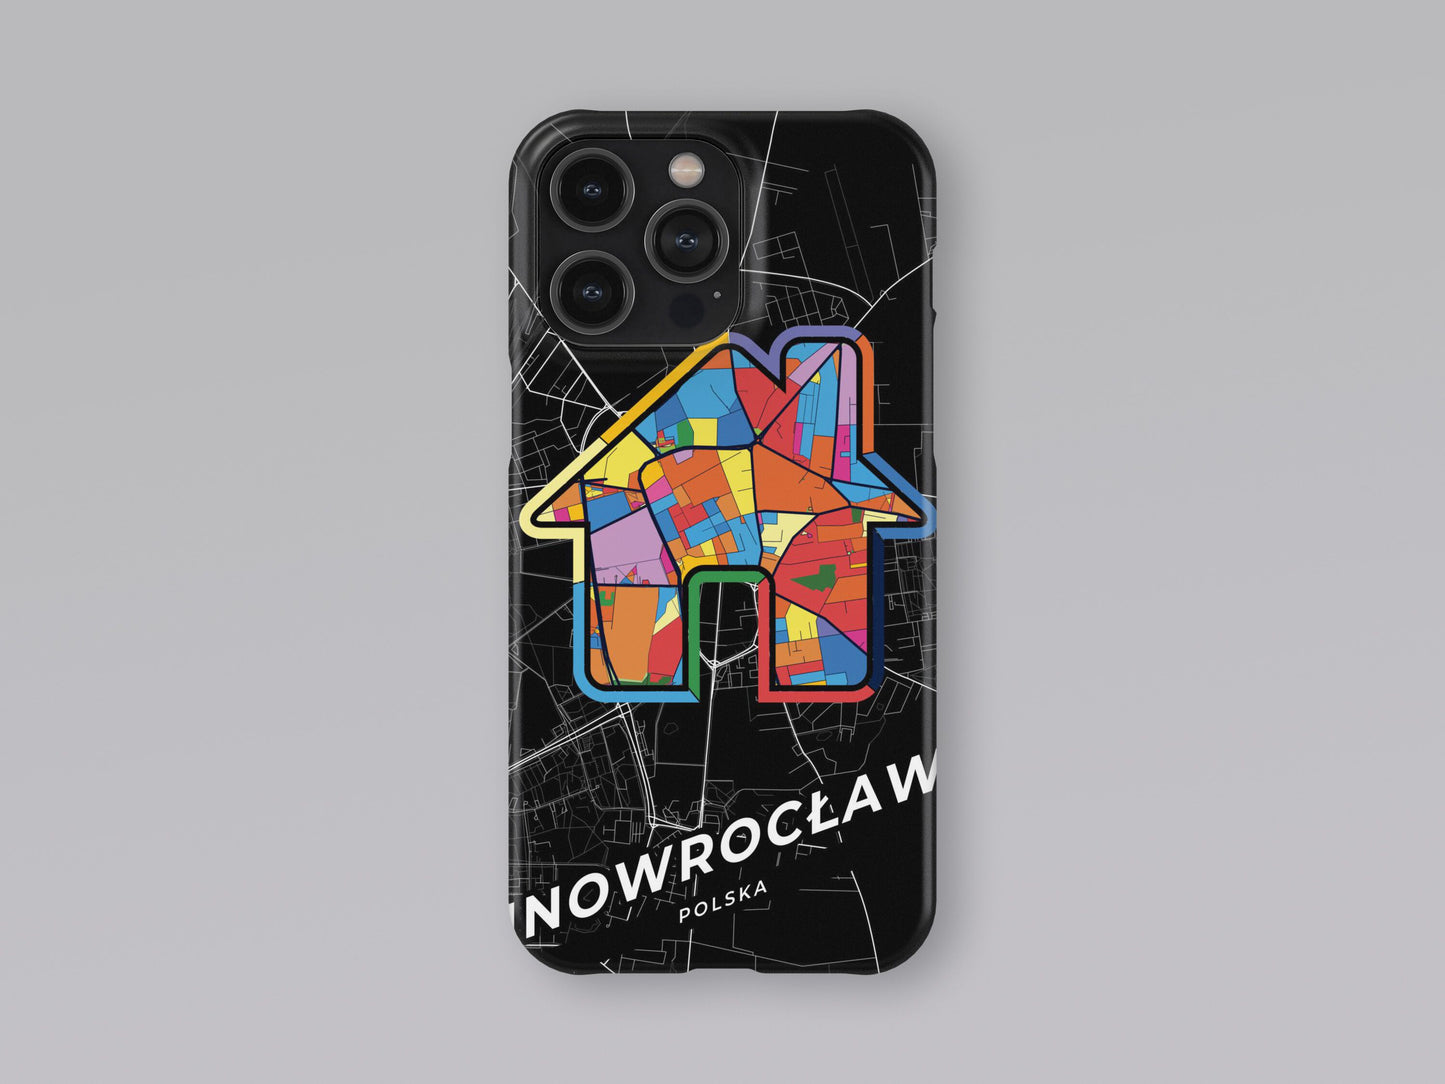 Inowrocław Poland slim phone case with colorful icon. Birthday, wedding or housewarming gift. Couple match cases. 3